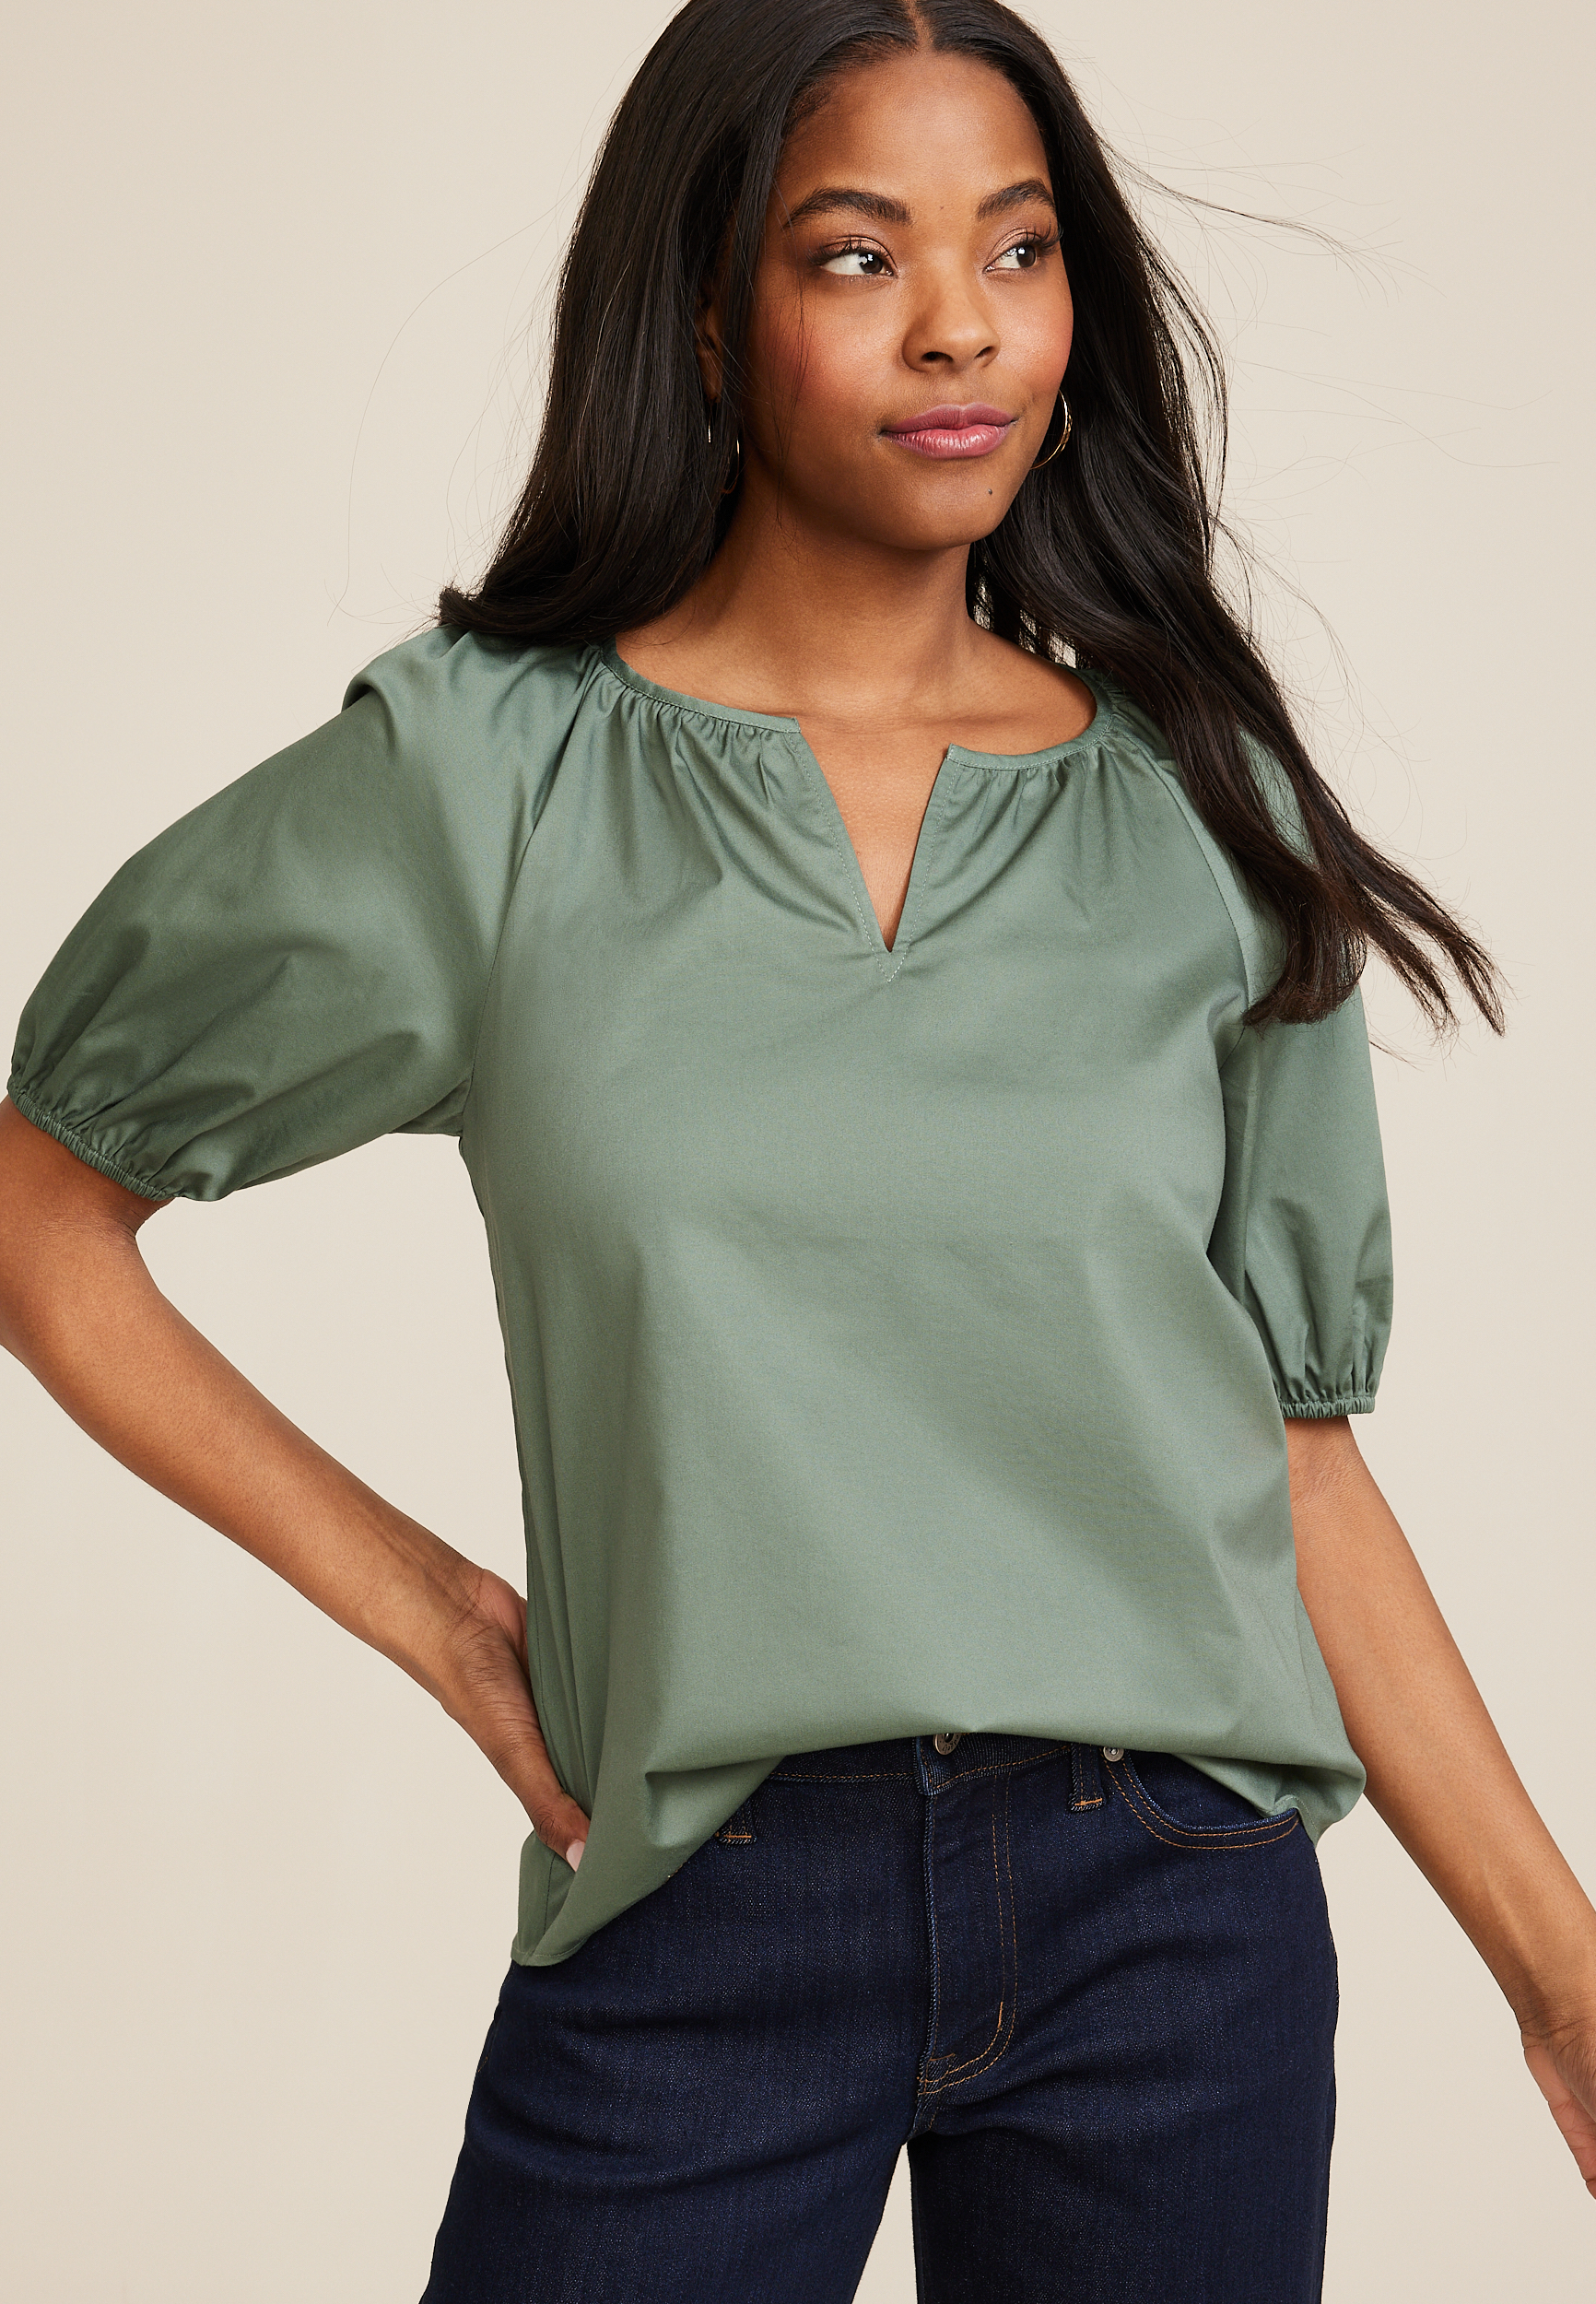 Fashion Tops For Women, Trendy Tops